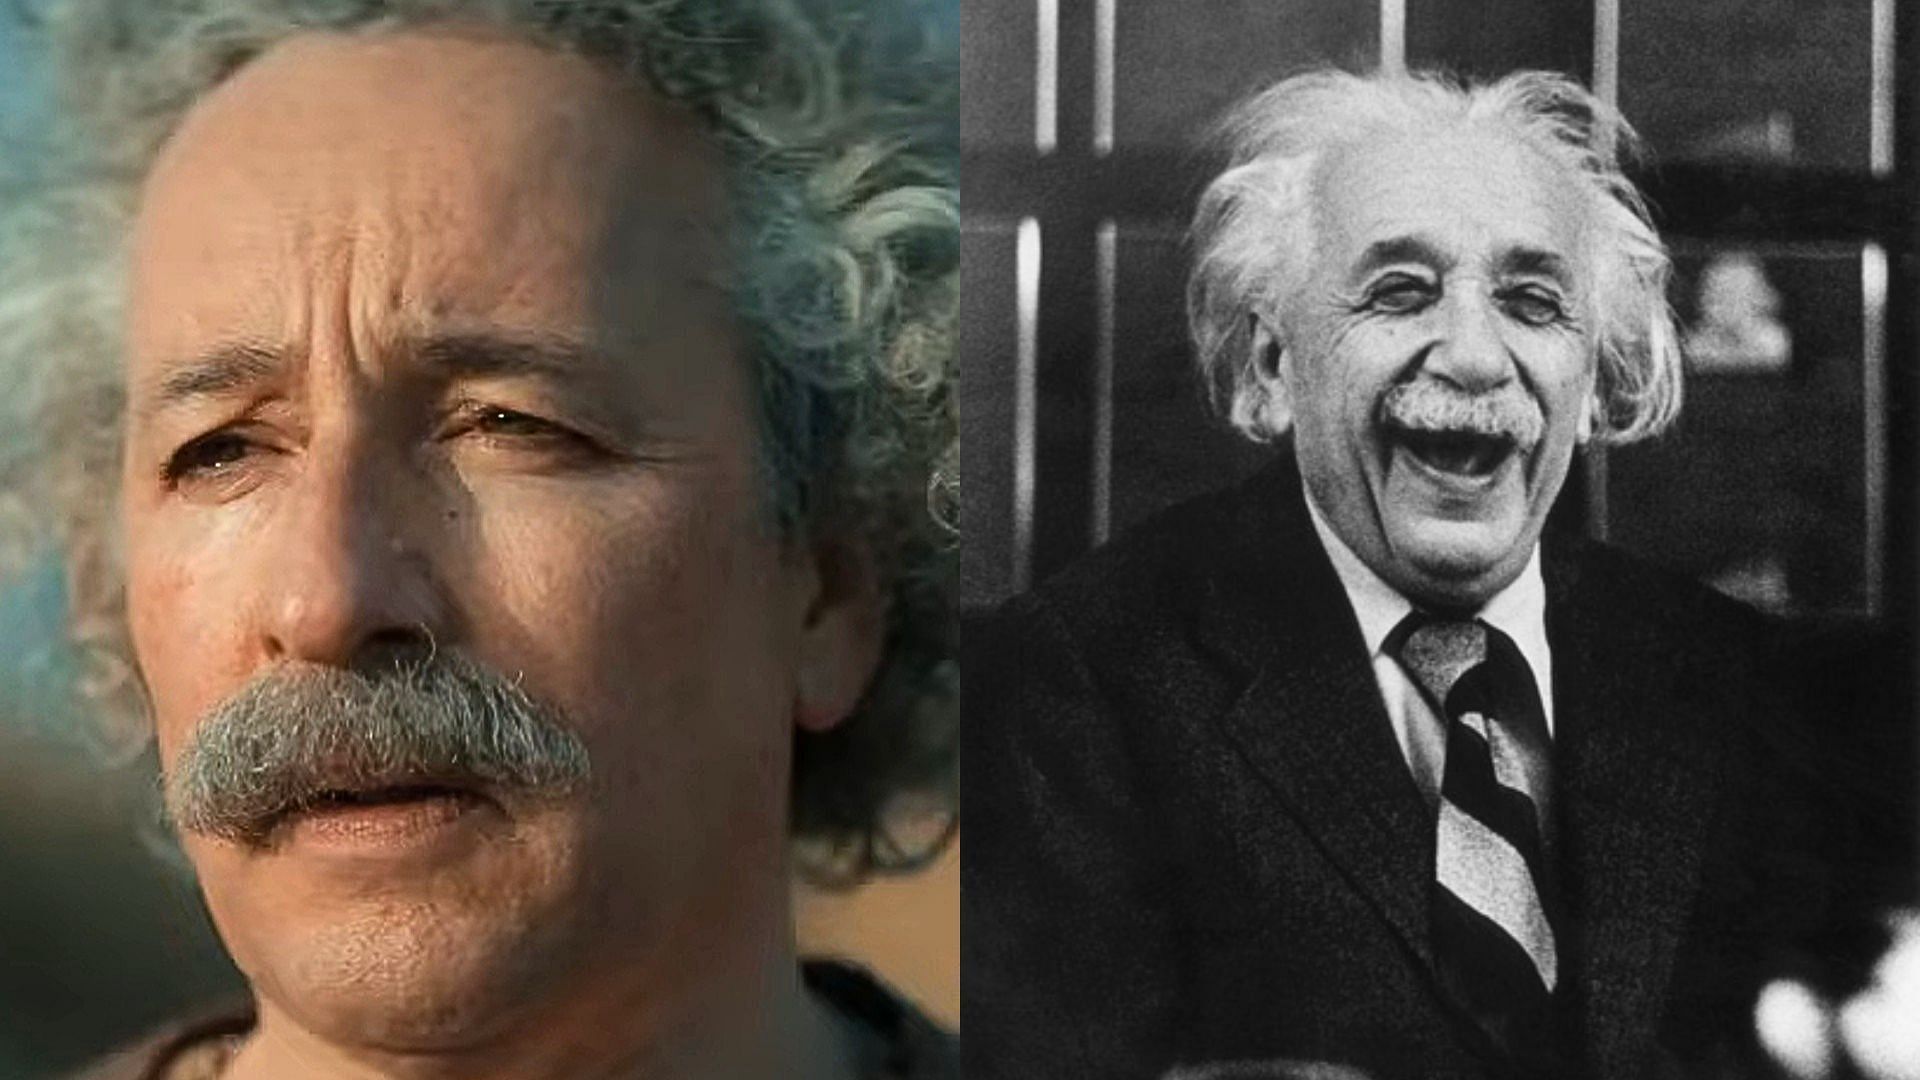 Einstein and the Bomb (L) is based on Albert Einstein (R) (Images via Netflix and Ruth Orkin)